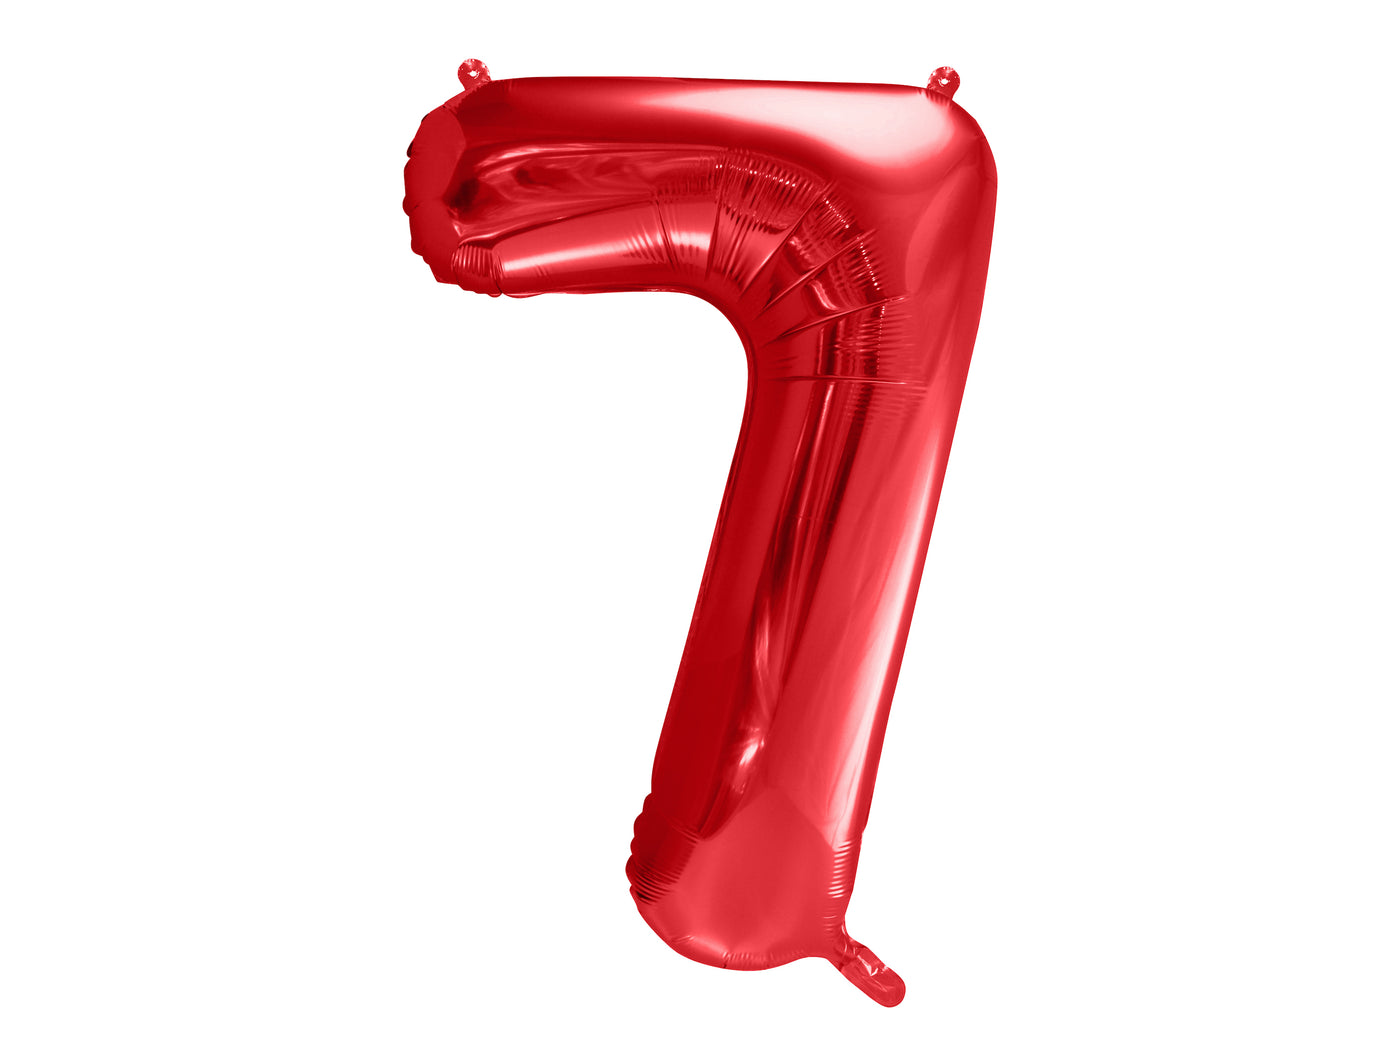 Foil Number Balloon, LARGE (0-9), red